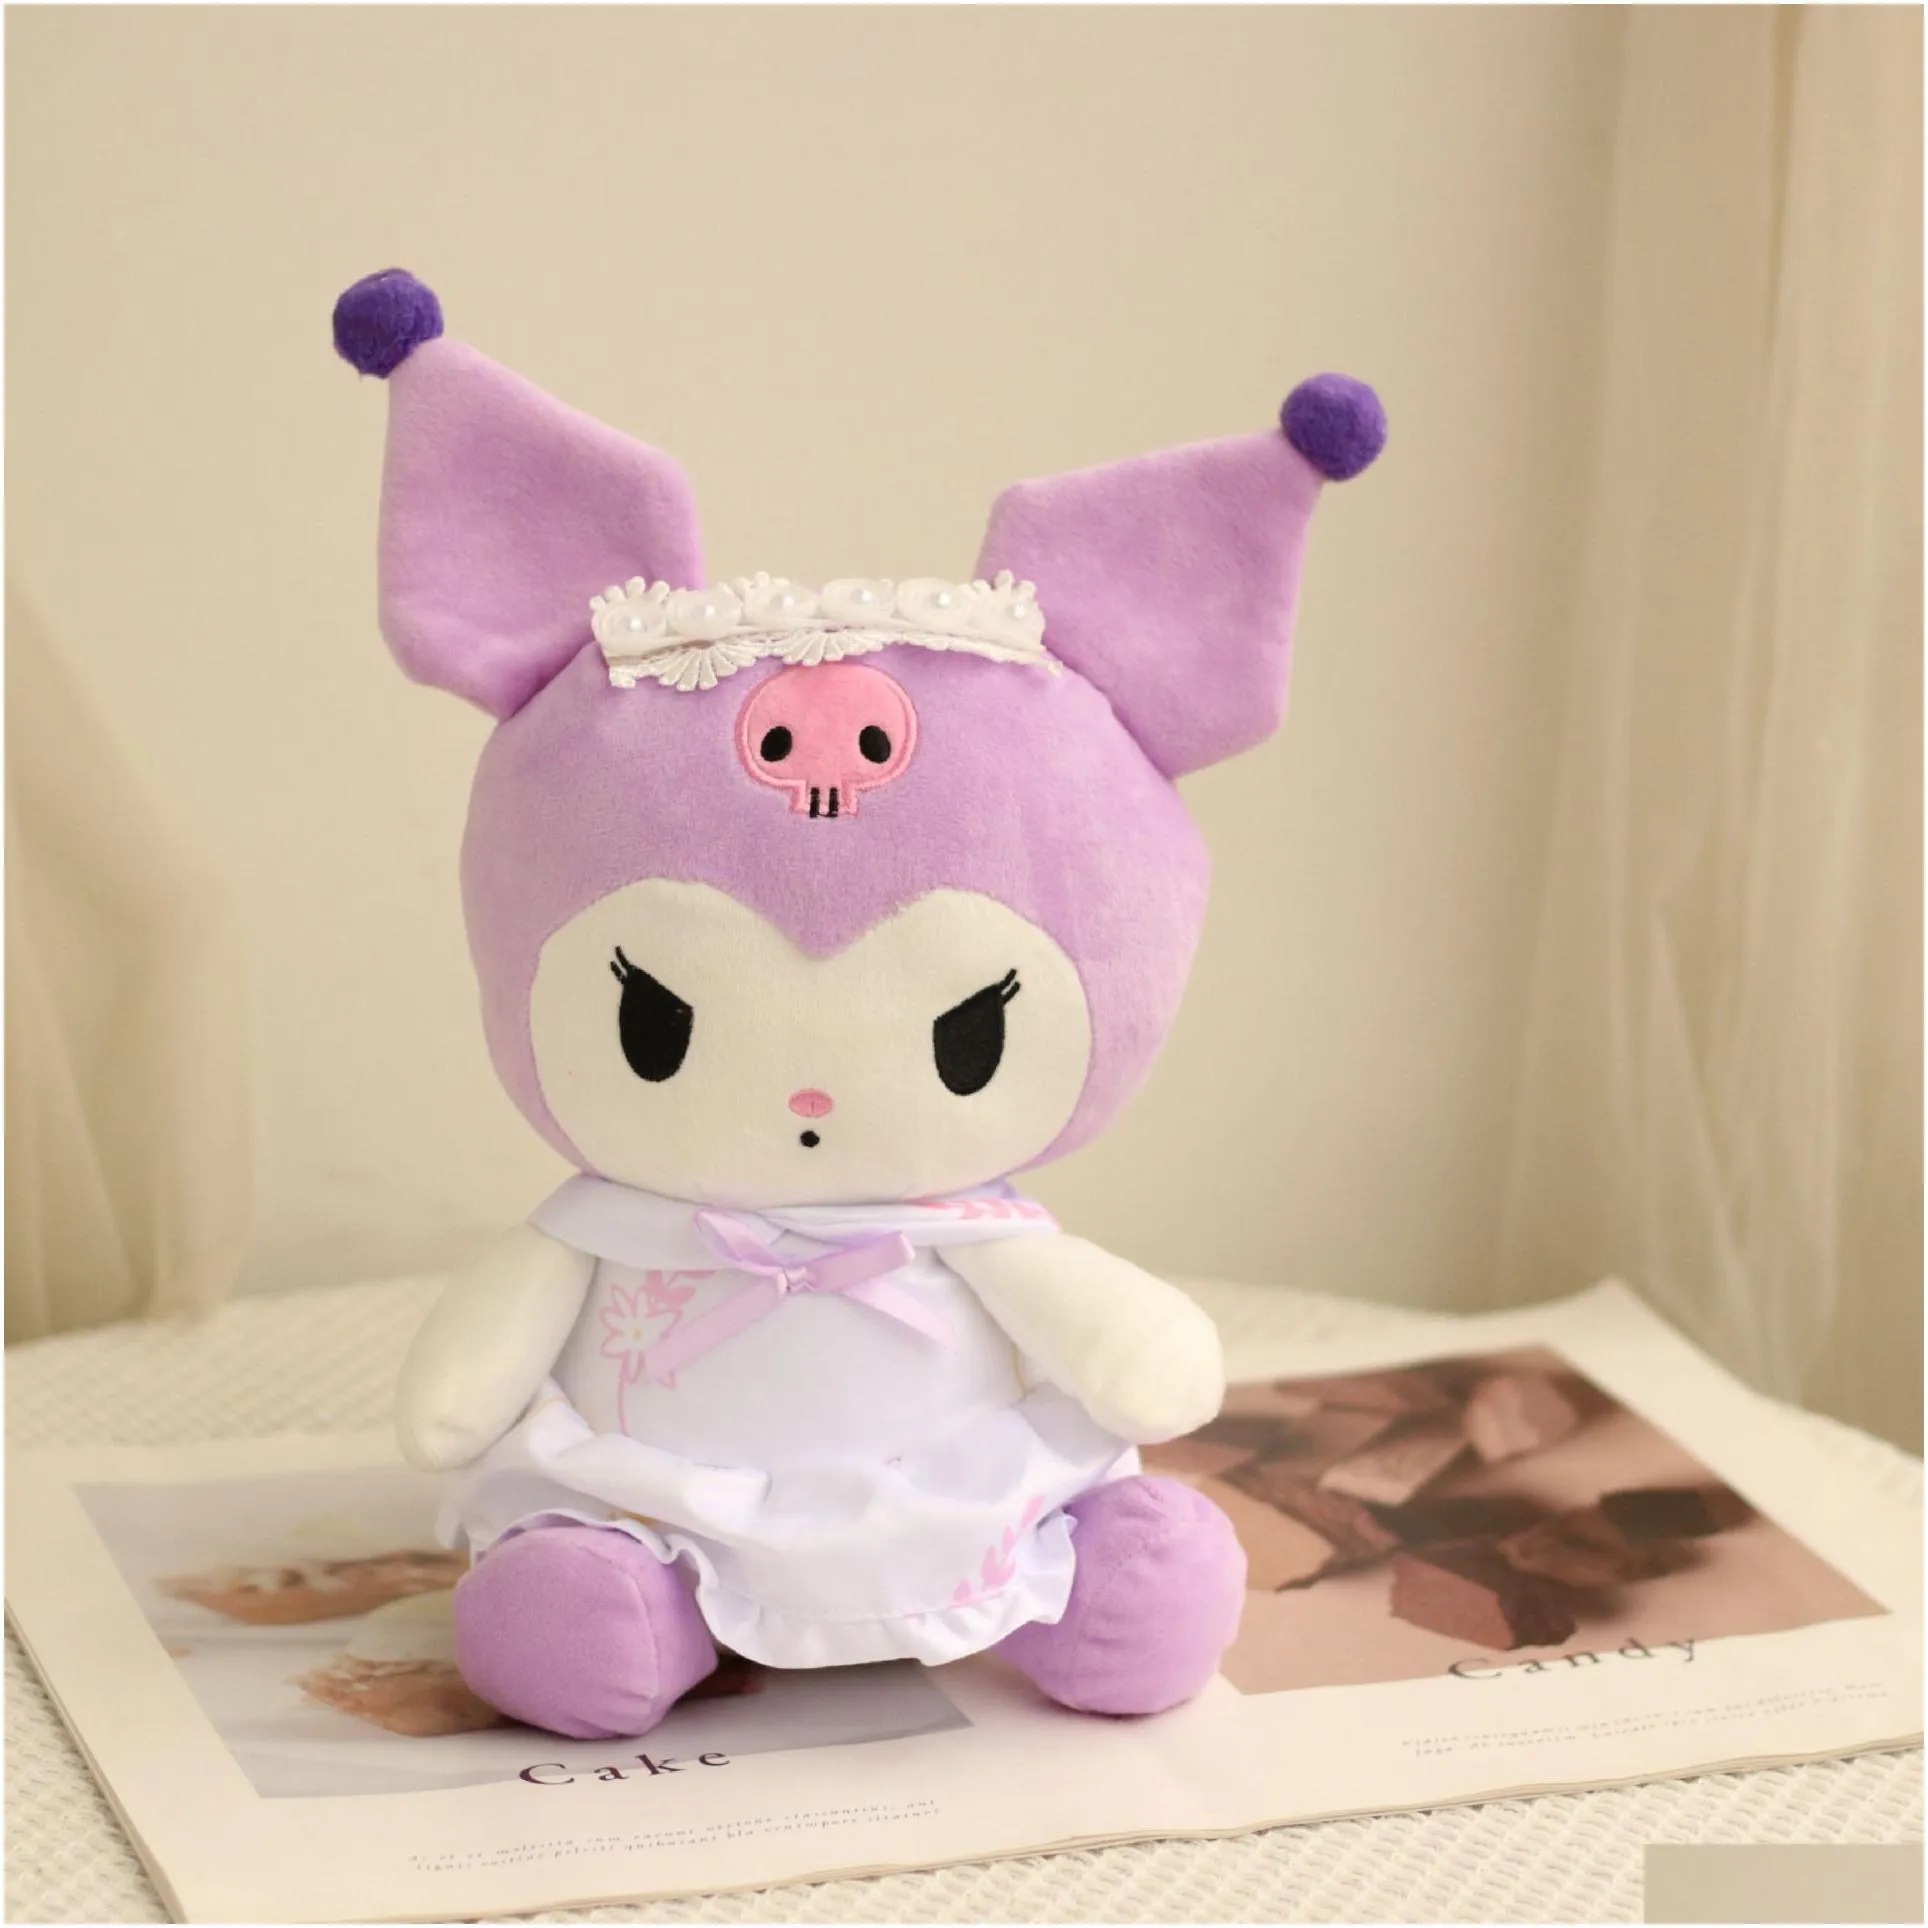 Movies & Tv Plush Toy 2022 25Cm Stuffed Animals Cartoon P Toys Ins Cute Imitation Wholesale Dolls Lovely Maid Outfit Kuromll For Good Dhk4A